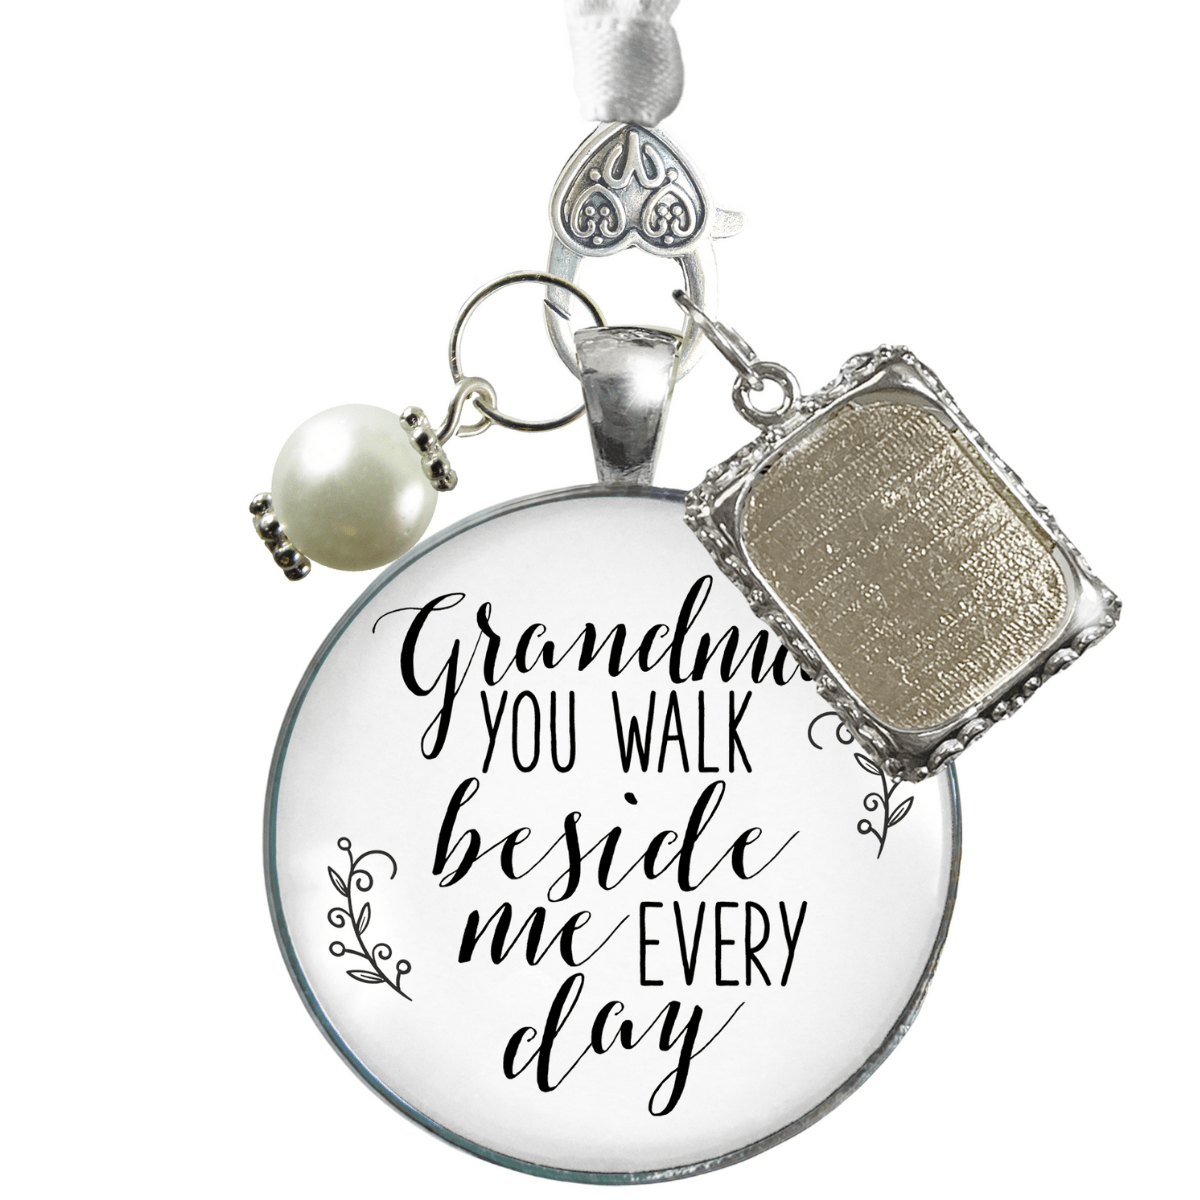 Bridal Bouquet Charm Grandma Picture Frame Wedding Memorial Silver Finish Jewelry - Gutsy Goodness Handmade Jewelry Gifts